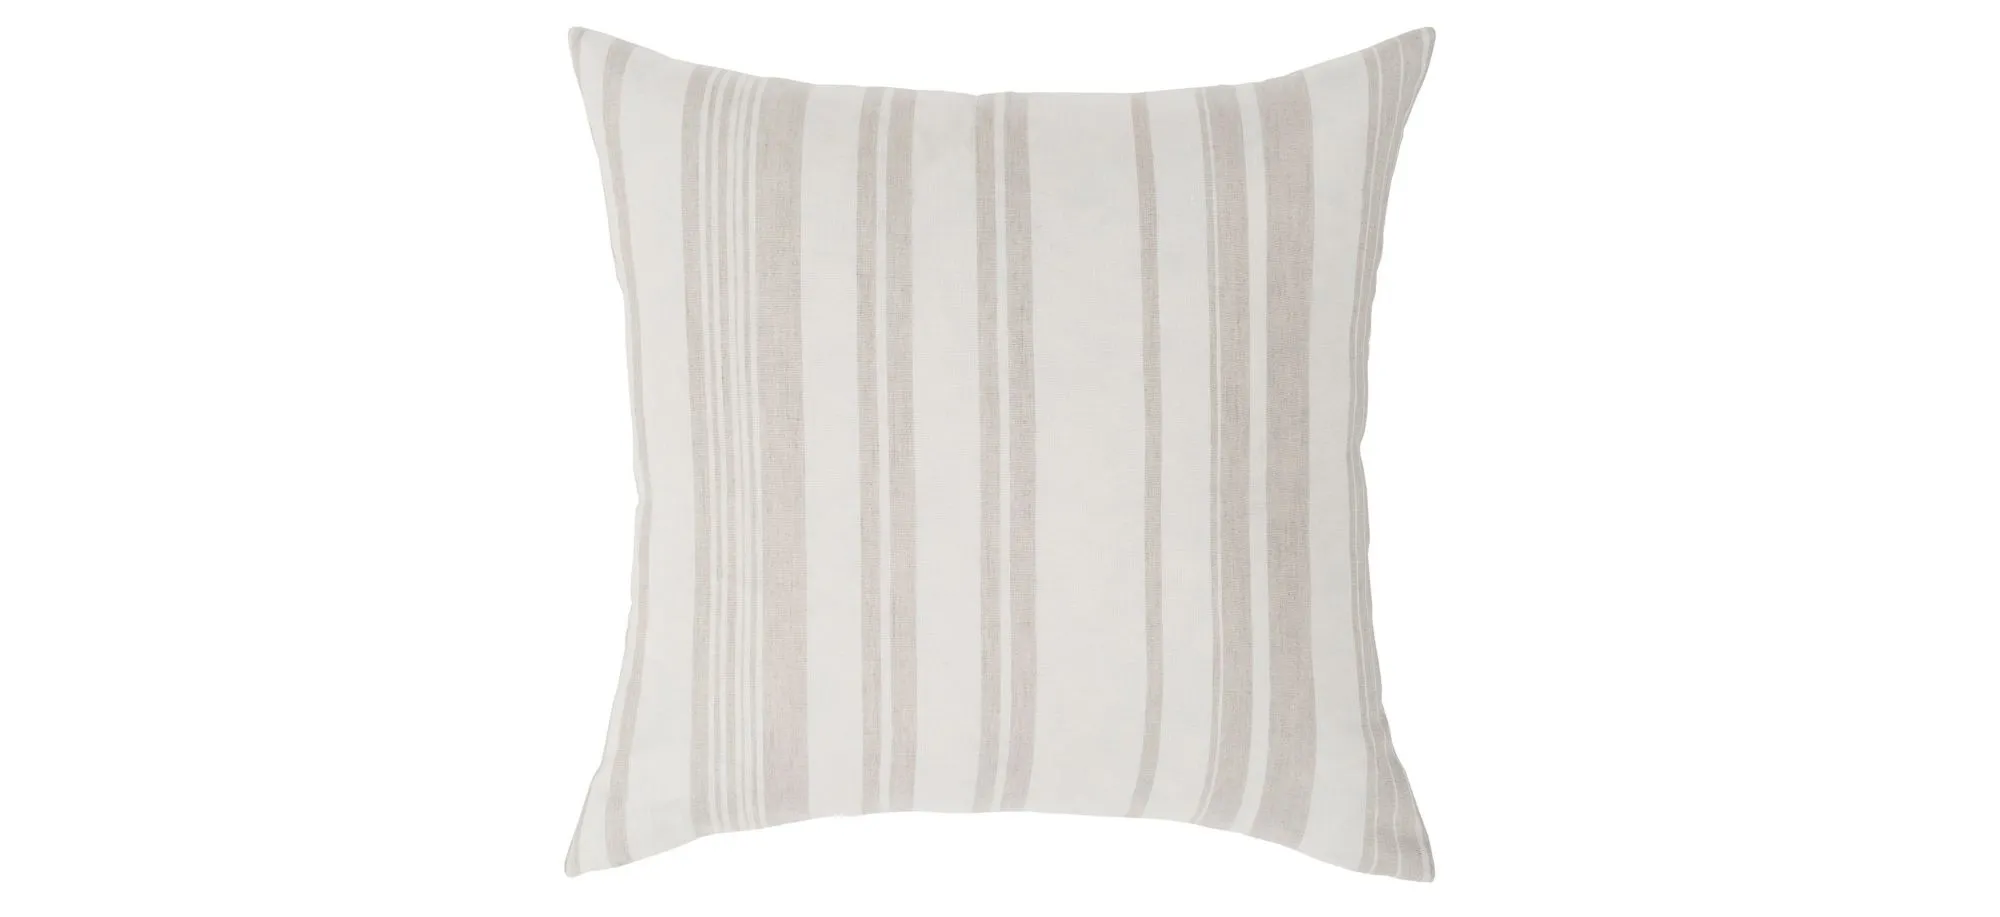 Baris 20" Poly Filled Throw Pillow in Ivory, Beige by Surya